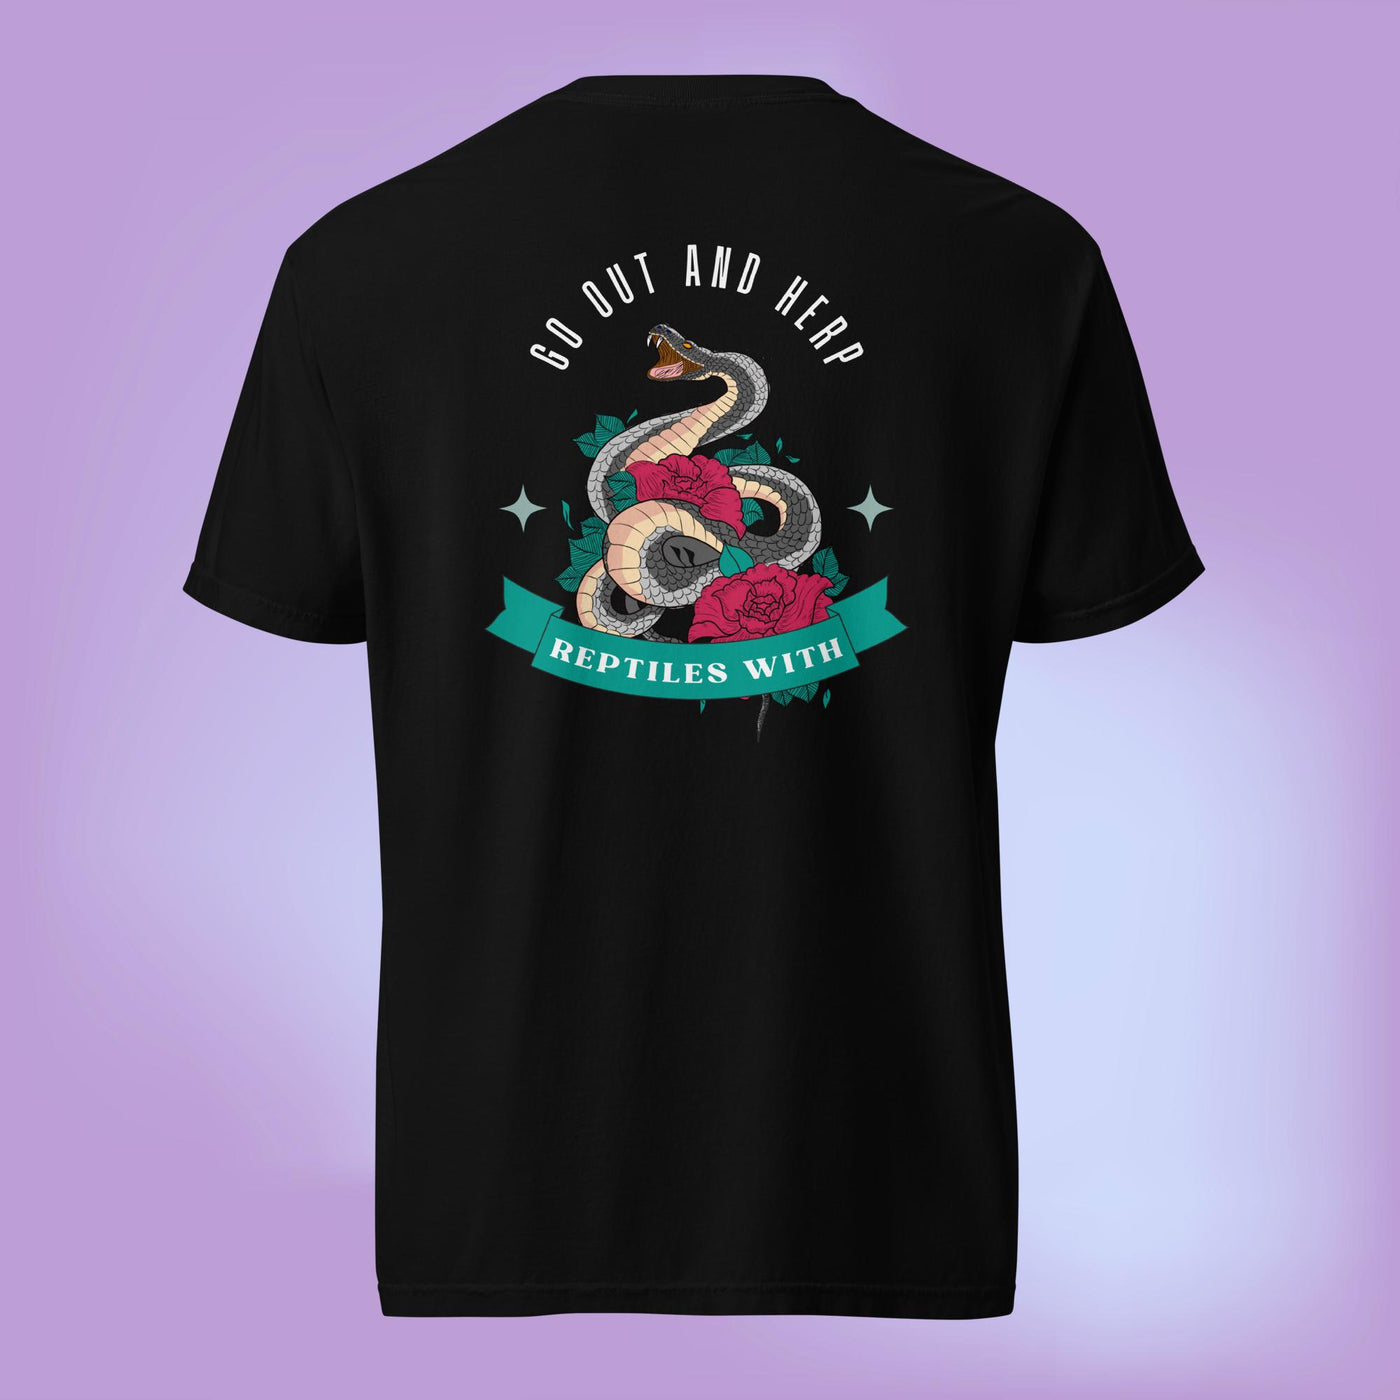 GO OUT AND HERP Reptiles With t-shirt